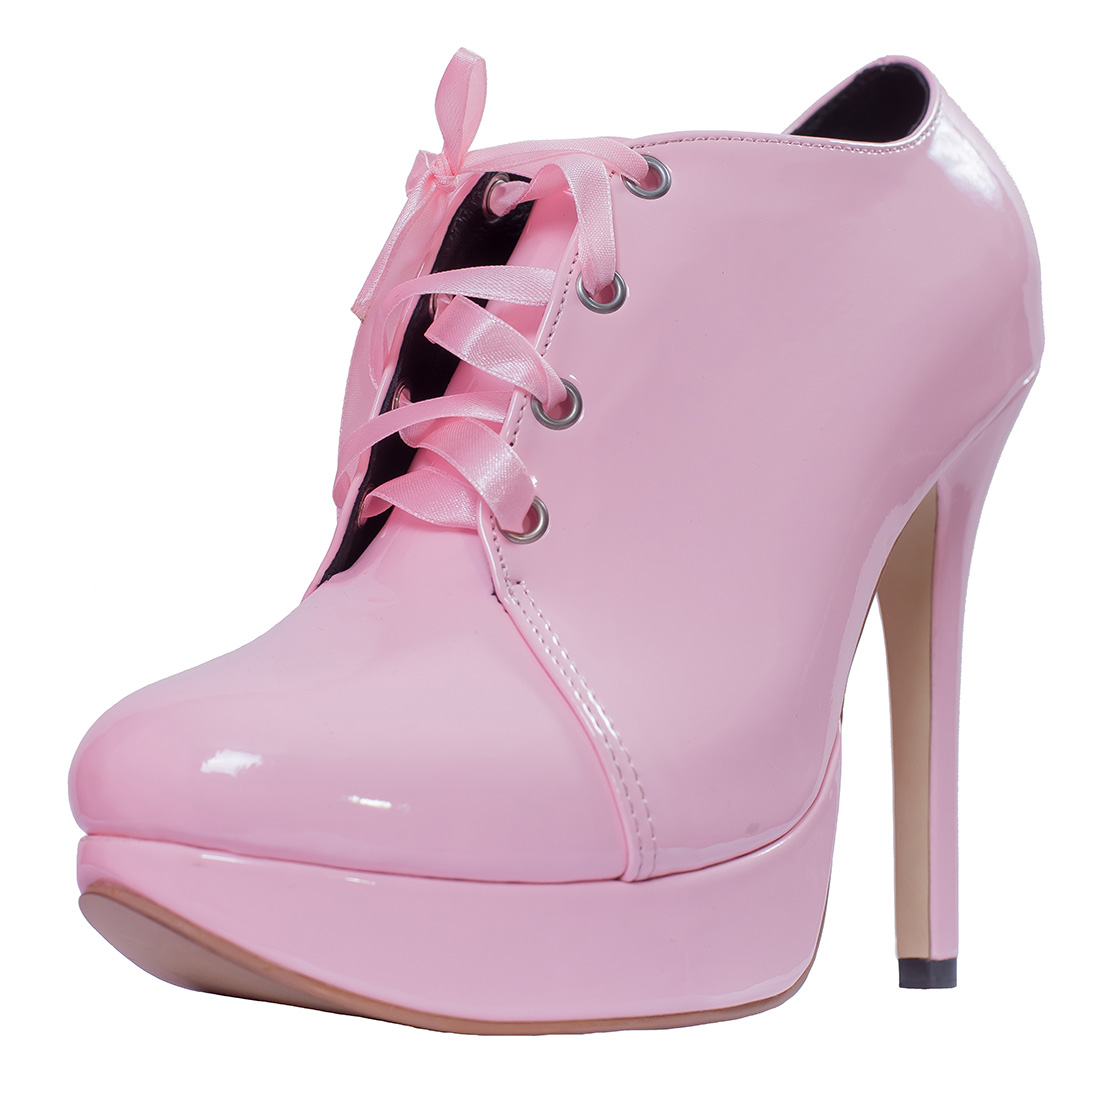 5 inch classic serving shoes pink 04